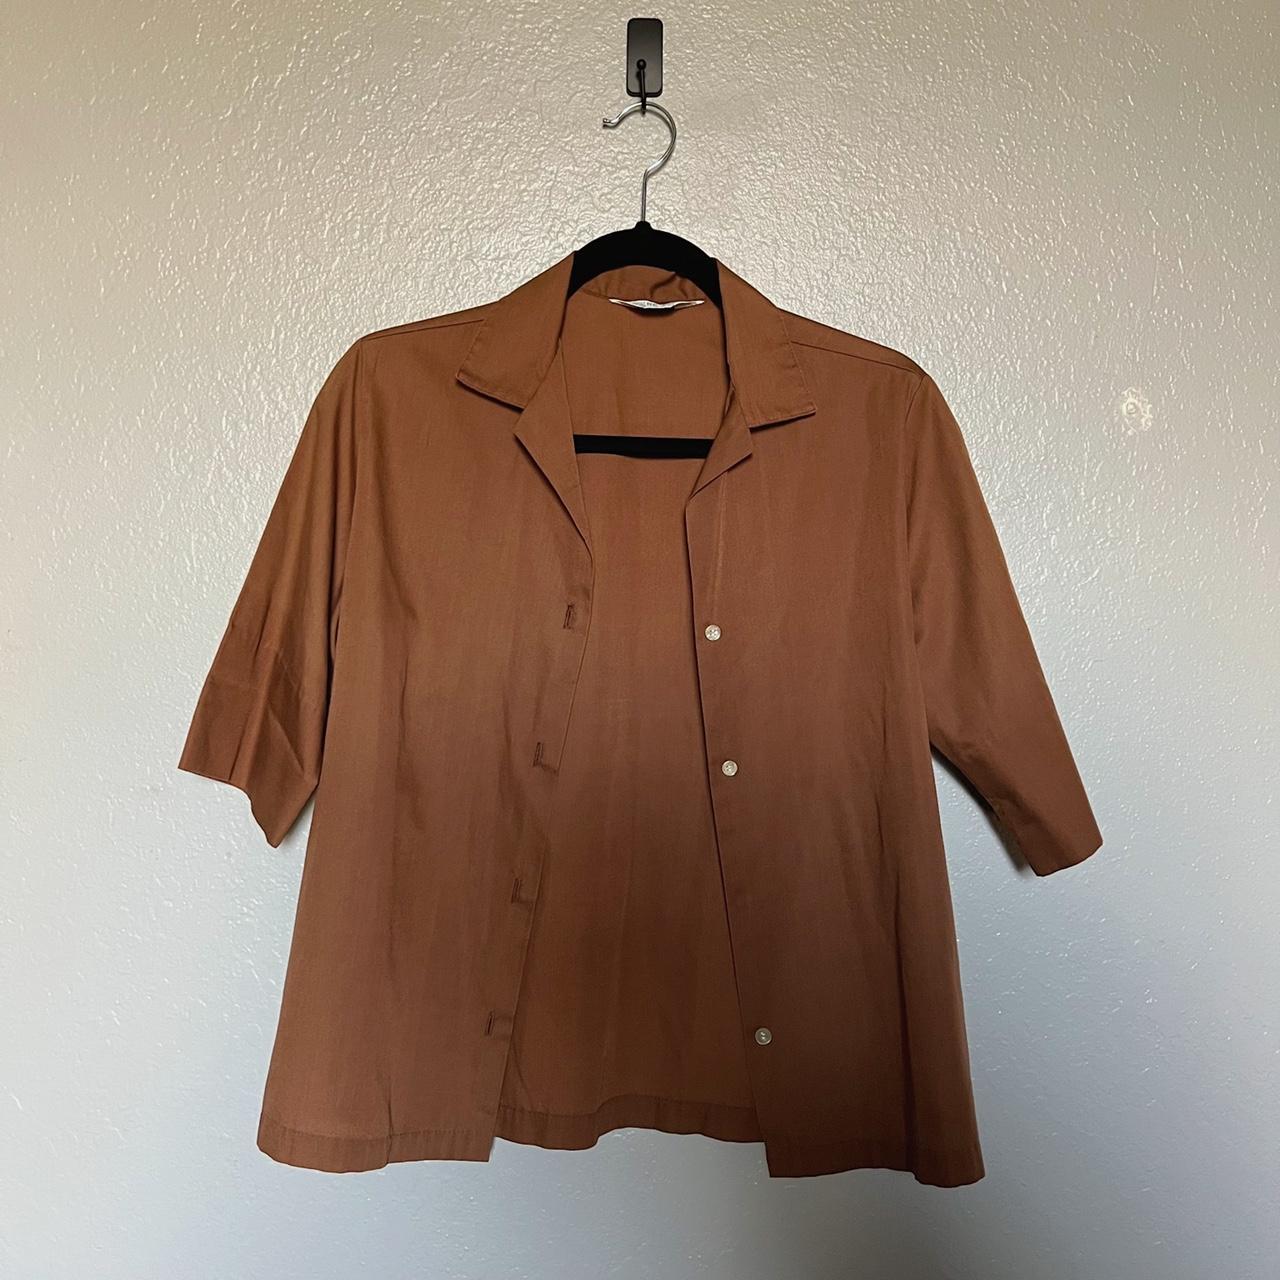 Sears Women's Brown and Tan Blouse